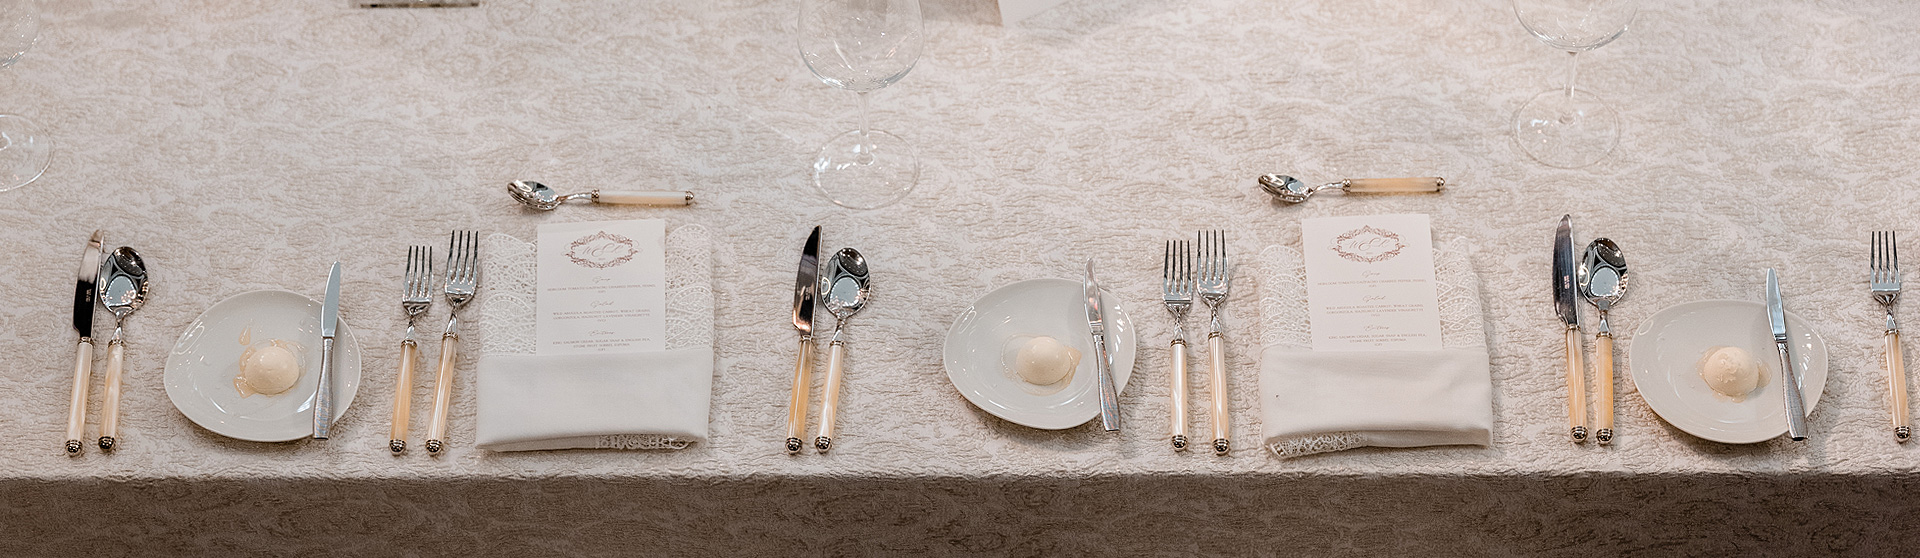 wedding table place settings